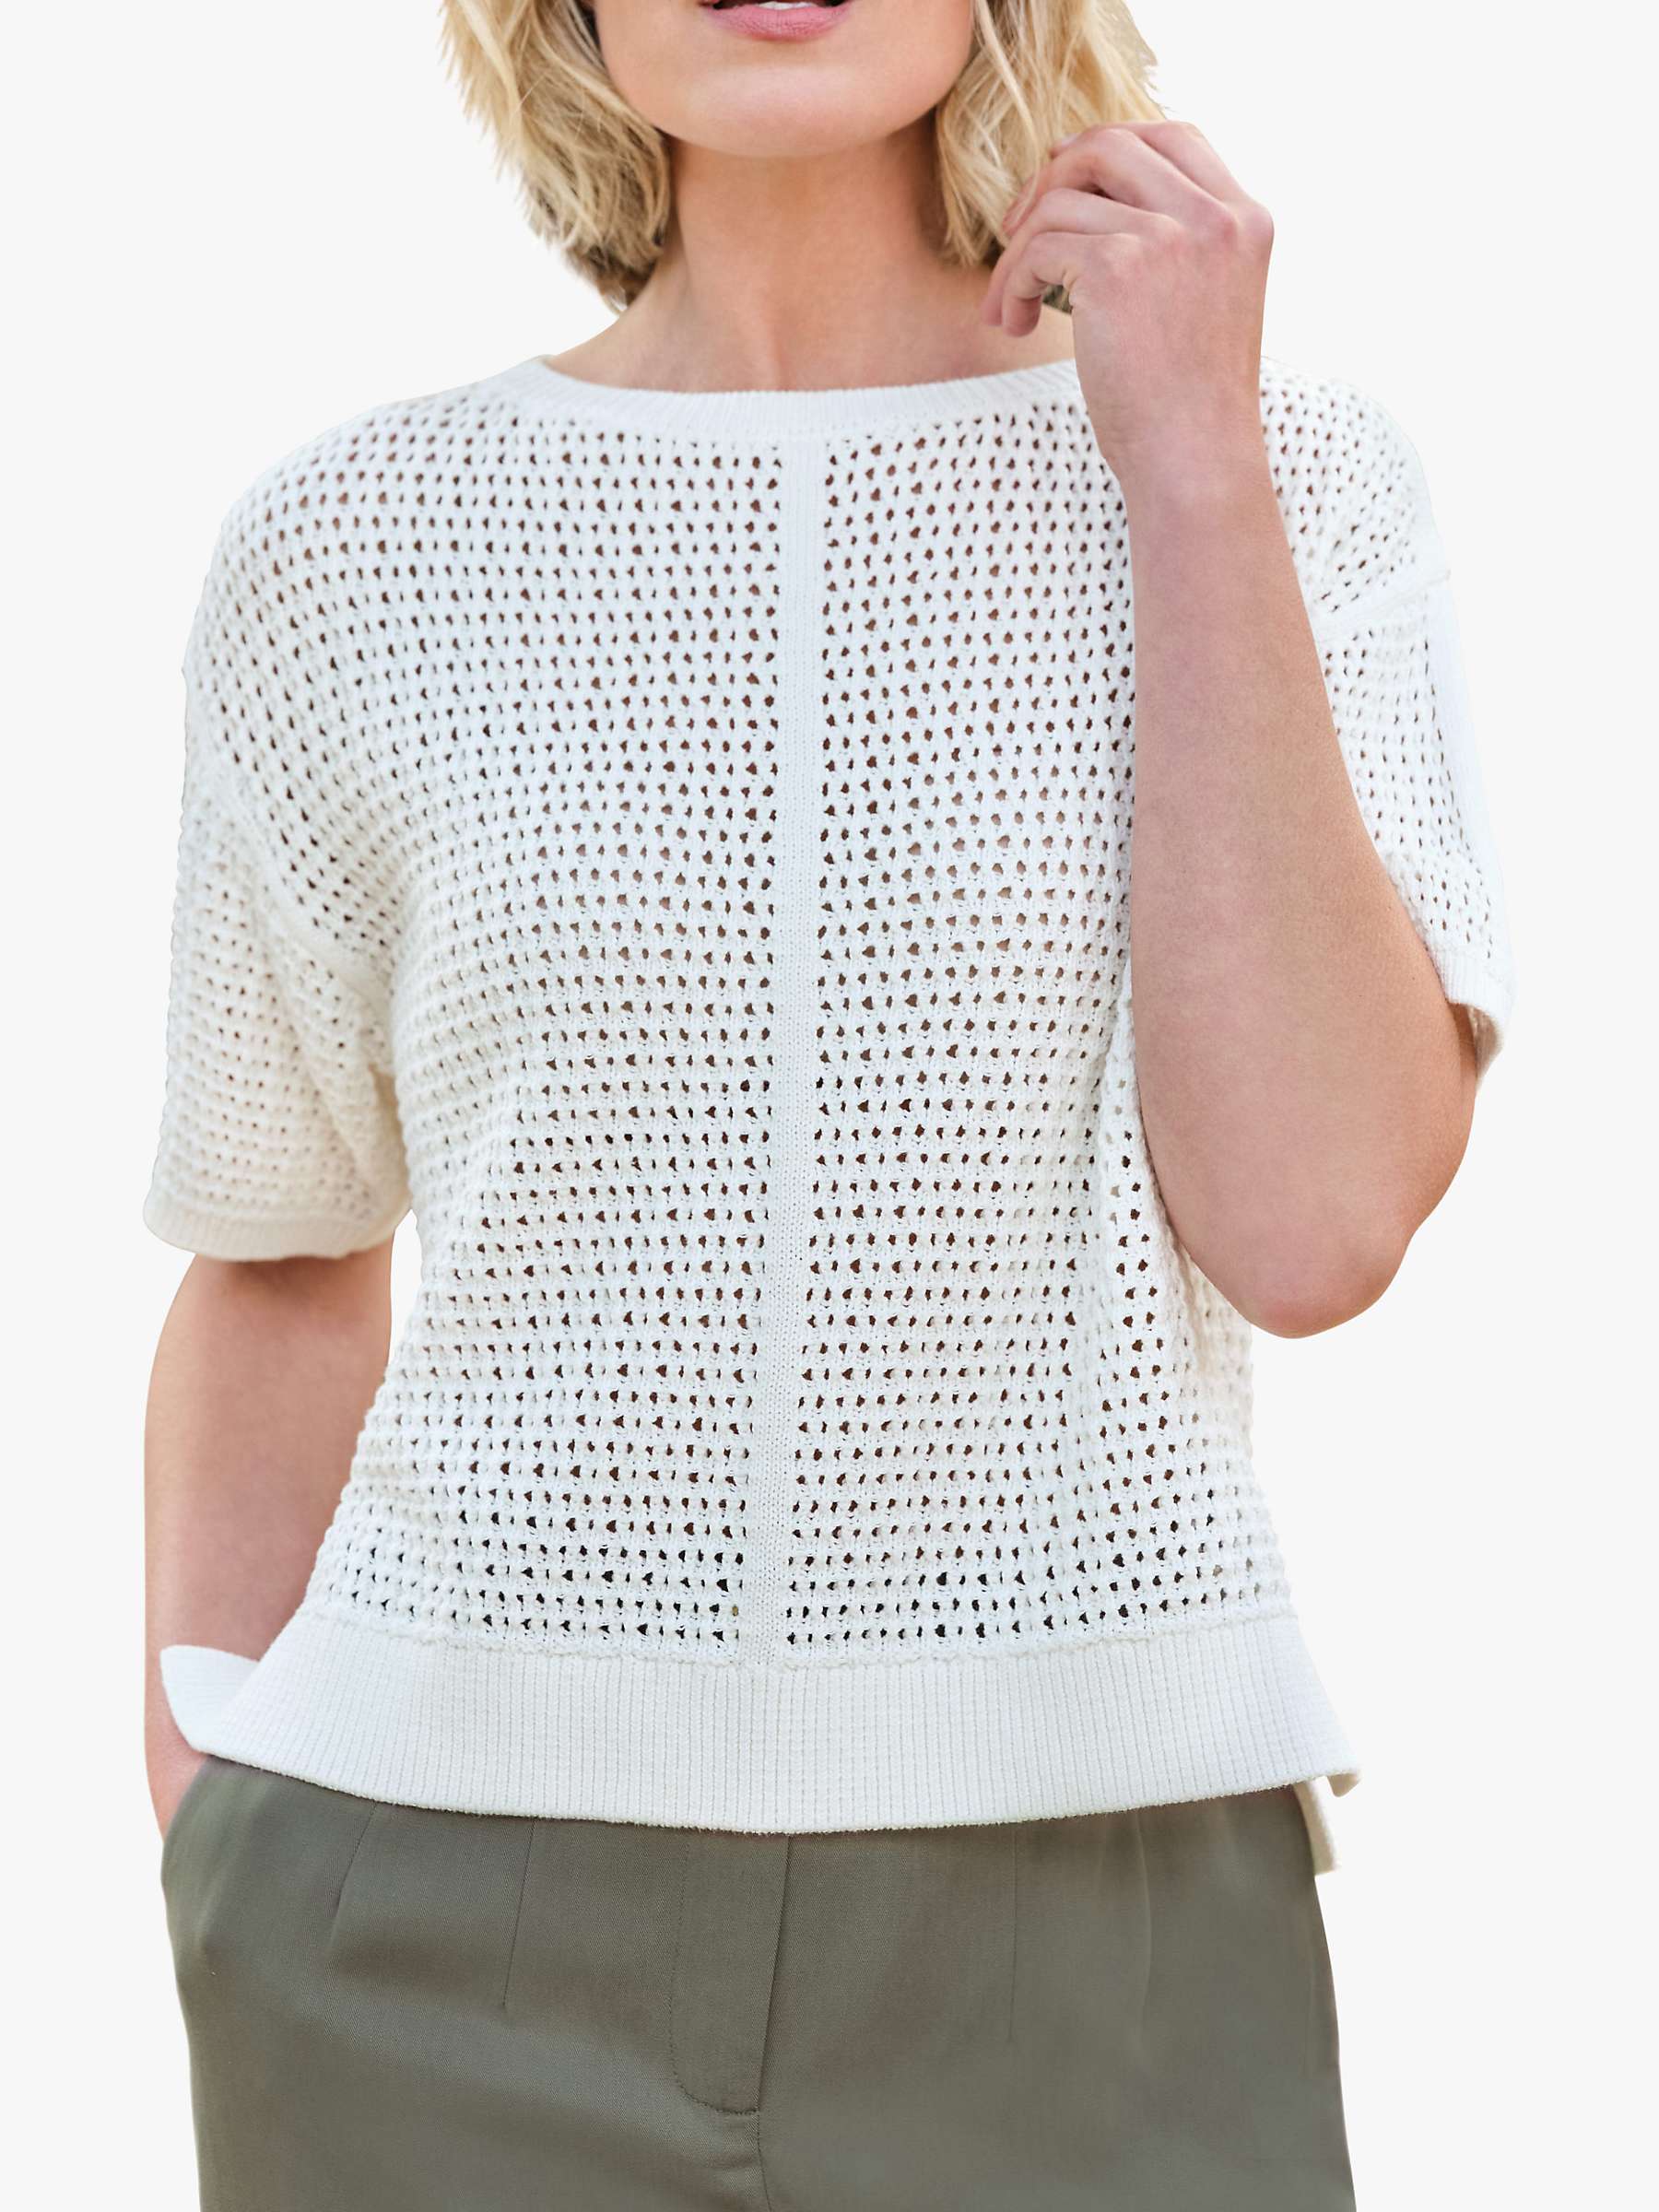 Buy Pure Collection Organic Cotton Stitch Interest Knit Top, Soft White Online at johnlewis.com